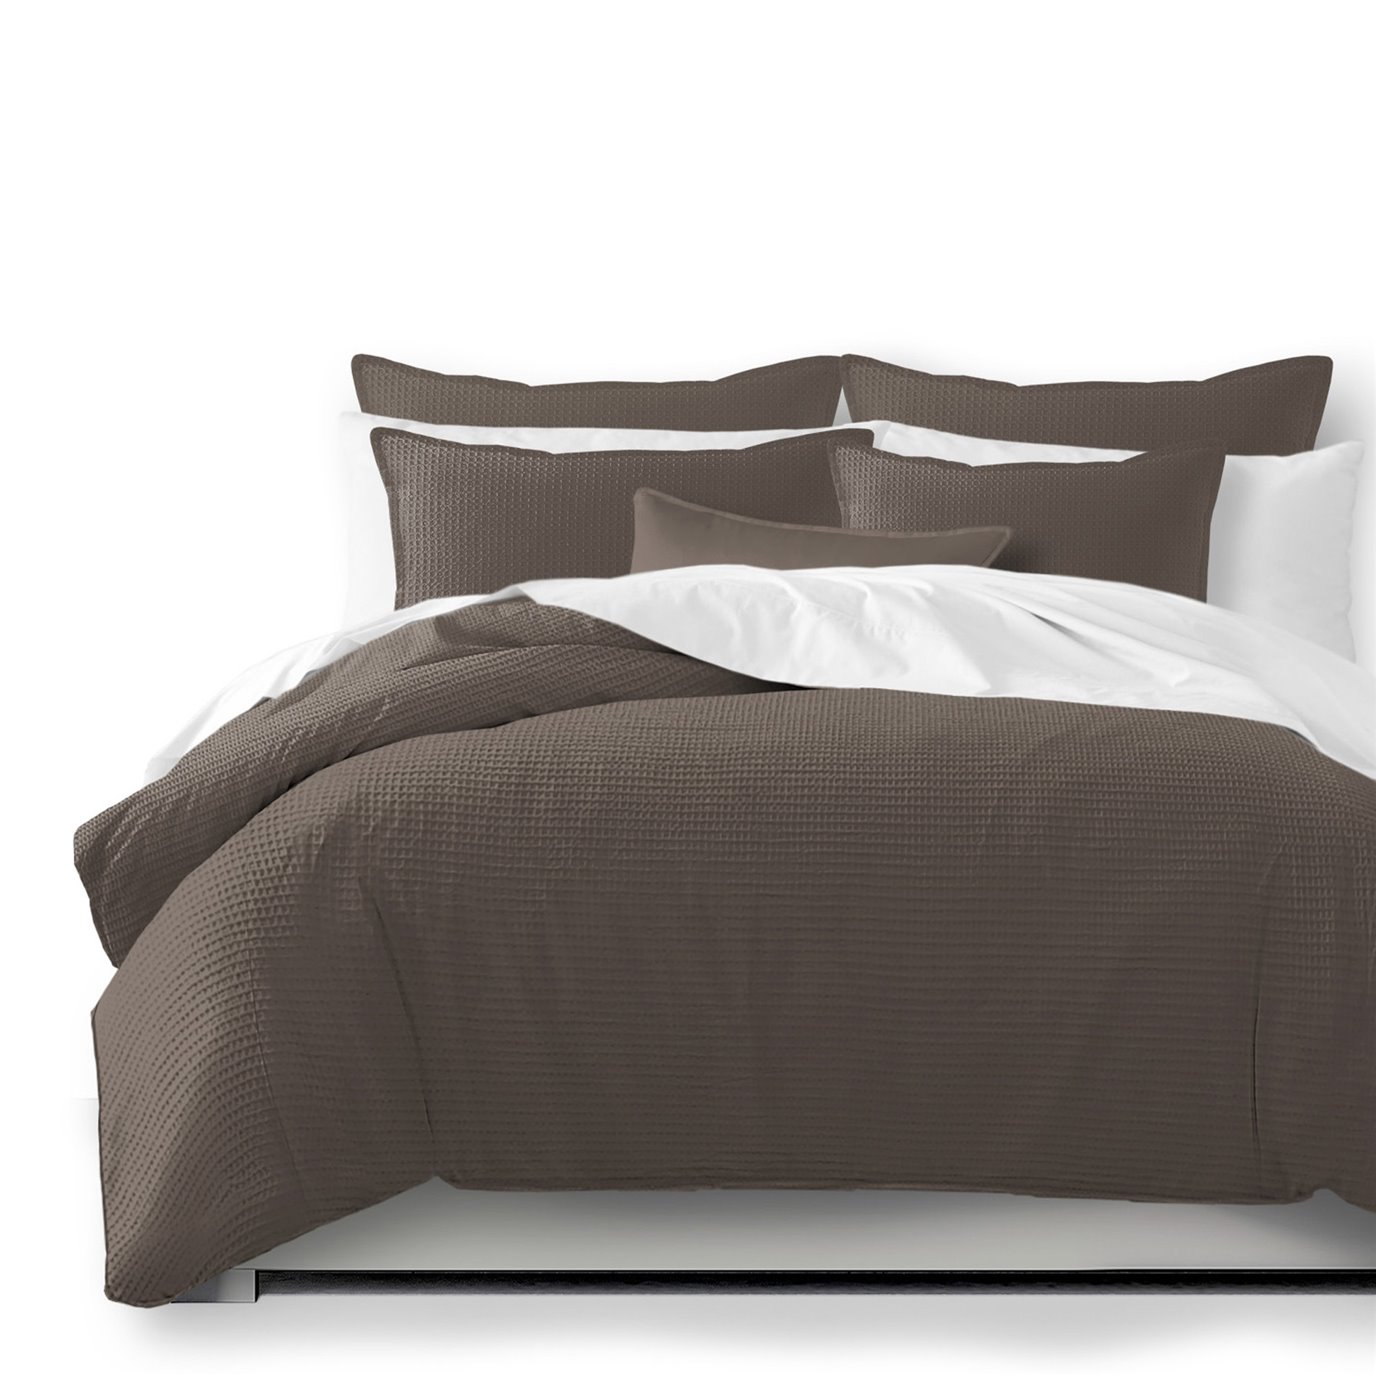 Classic Waffle Mocca Duvet Cover and Pillow Sham(s) Set - Size King / California King